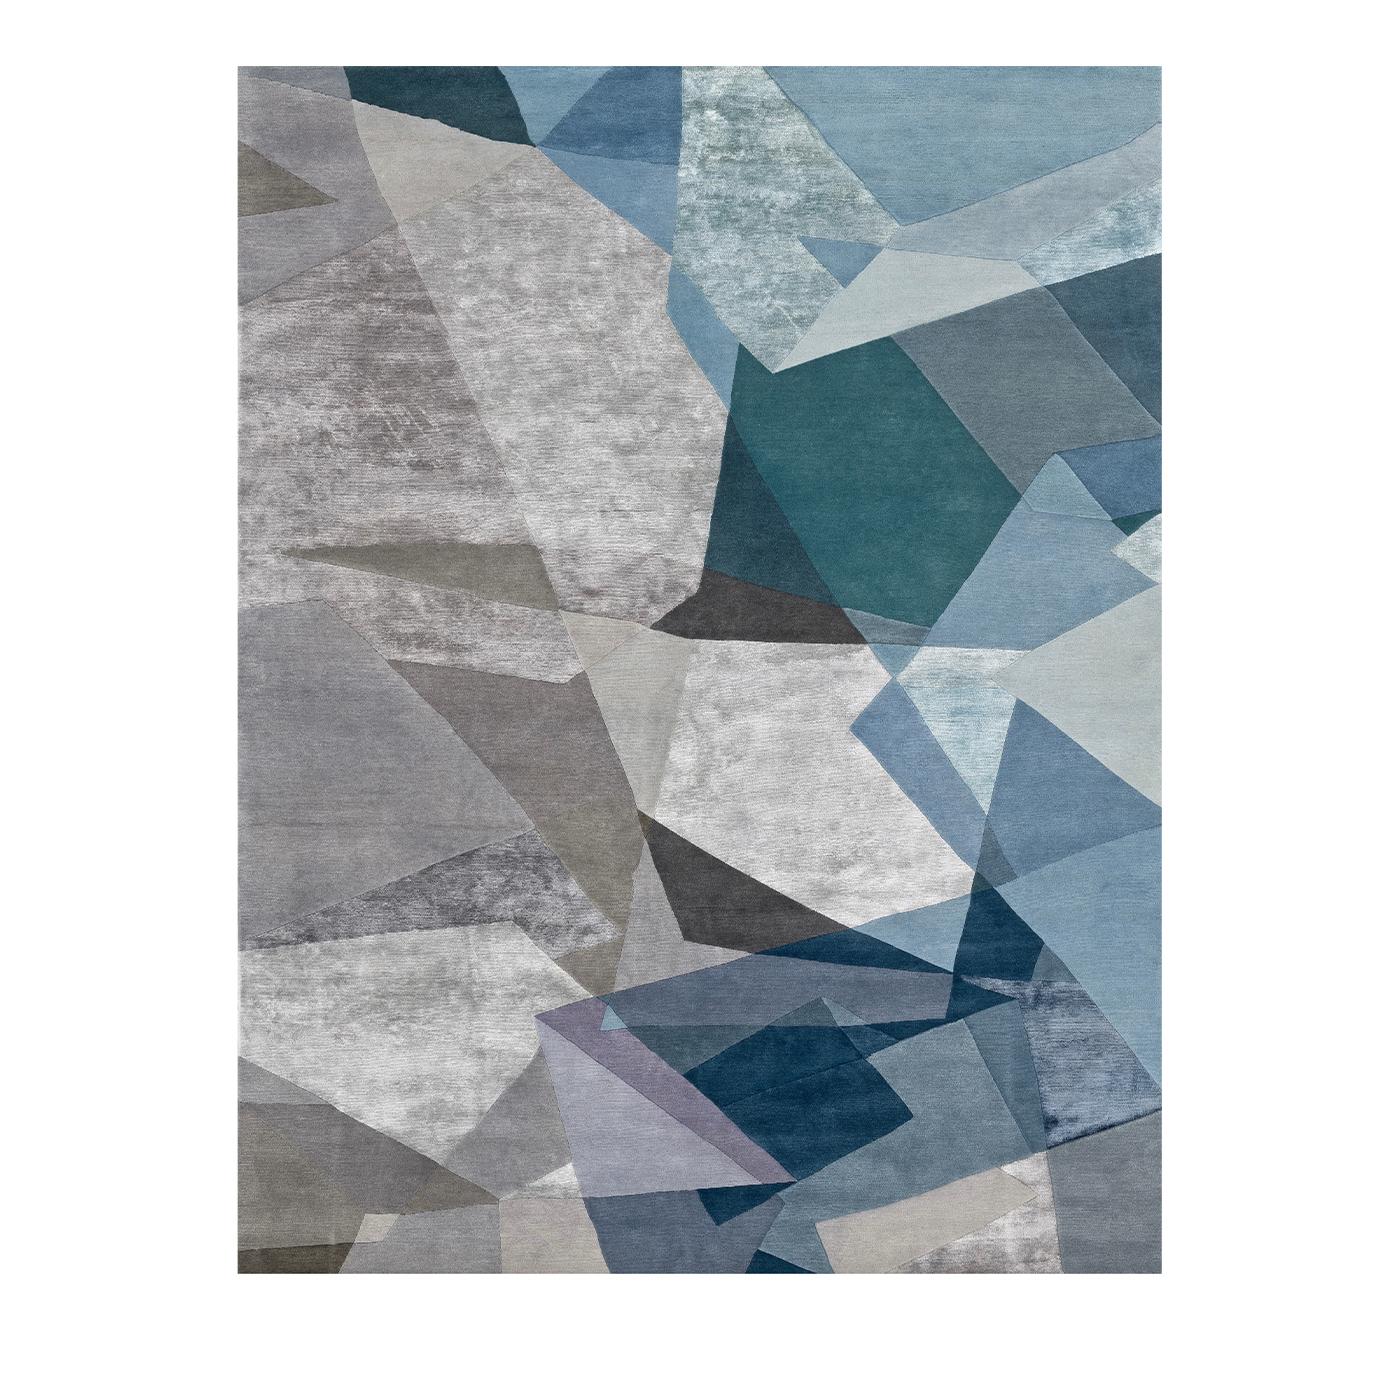 A modern, Minimalist, geometric design features on this Skyla Ver.D rug in superb shades of gray and steel blue. Composed in an equal mix of silk and Himalayan wool, this remarkable rug measures 300 x 240 cm. Customers who require a variation in